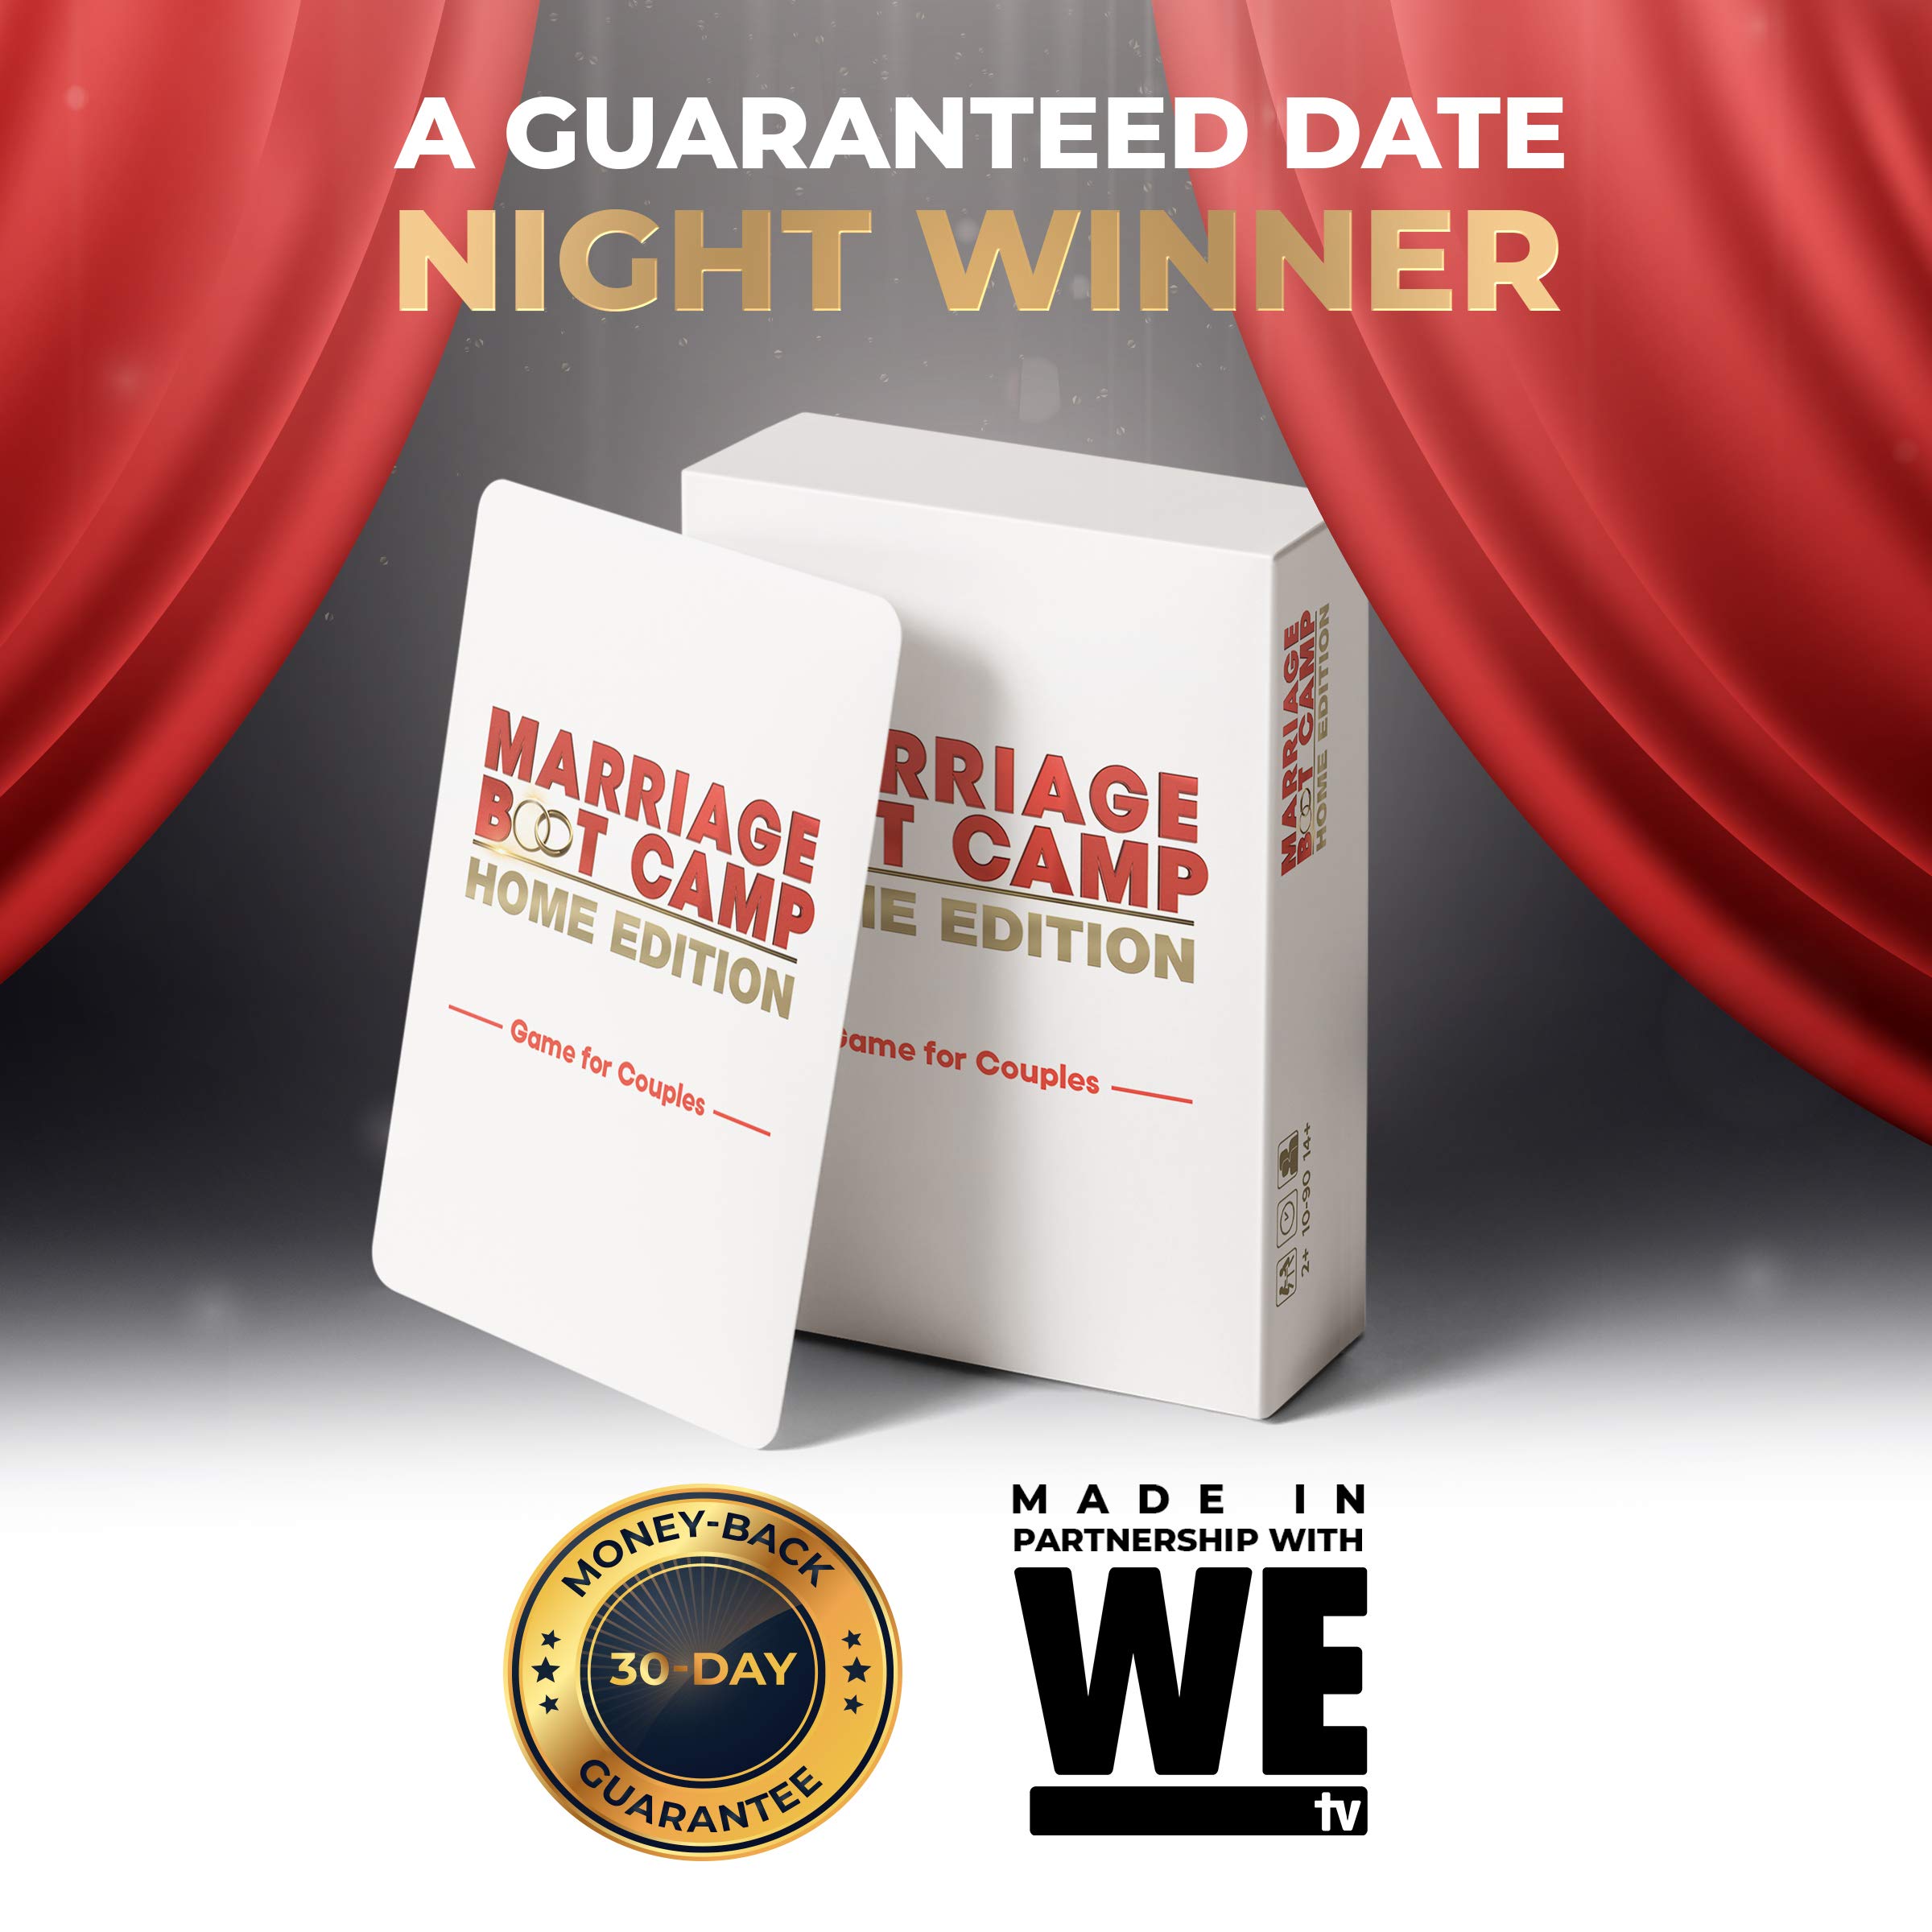 Marriage Boot Camp Home Edition - The Ultimate in Couples Games from The Hit WE tv Series - Conversation Cards in 6 Categories - Date Night Box Card Game - Fun and Unique Couples Gifts